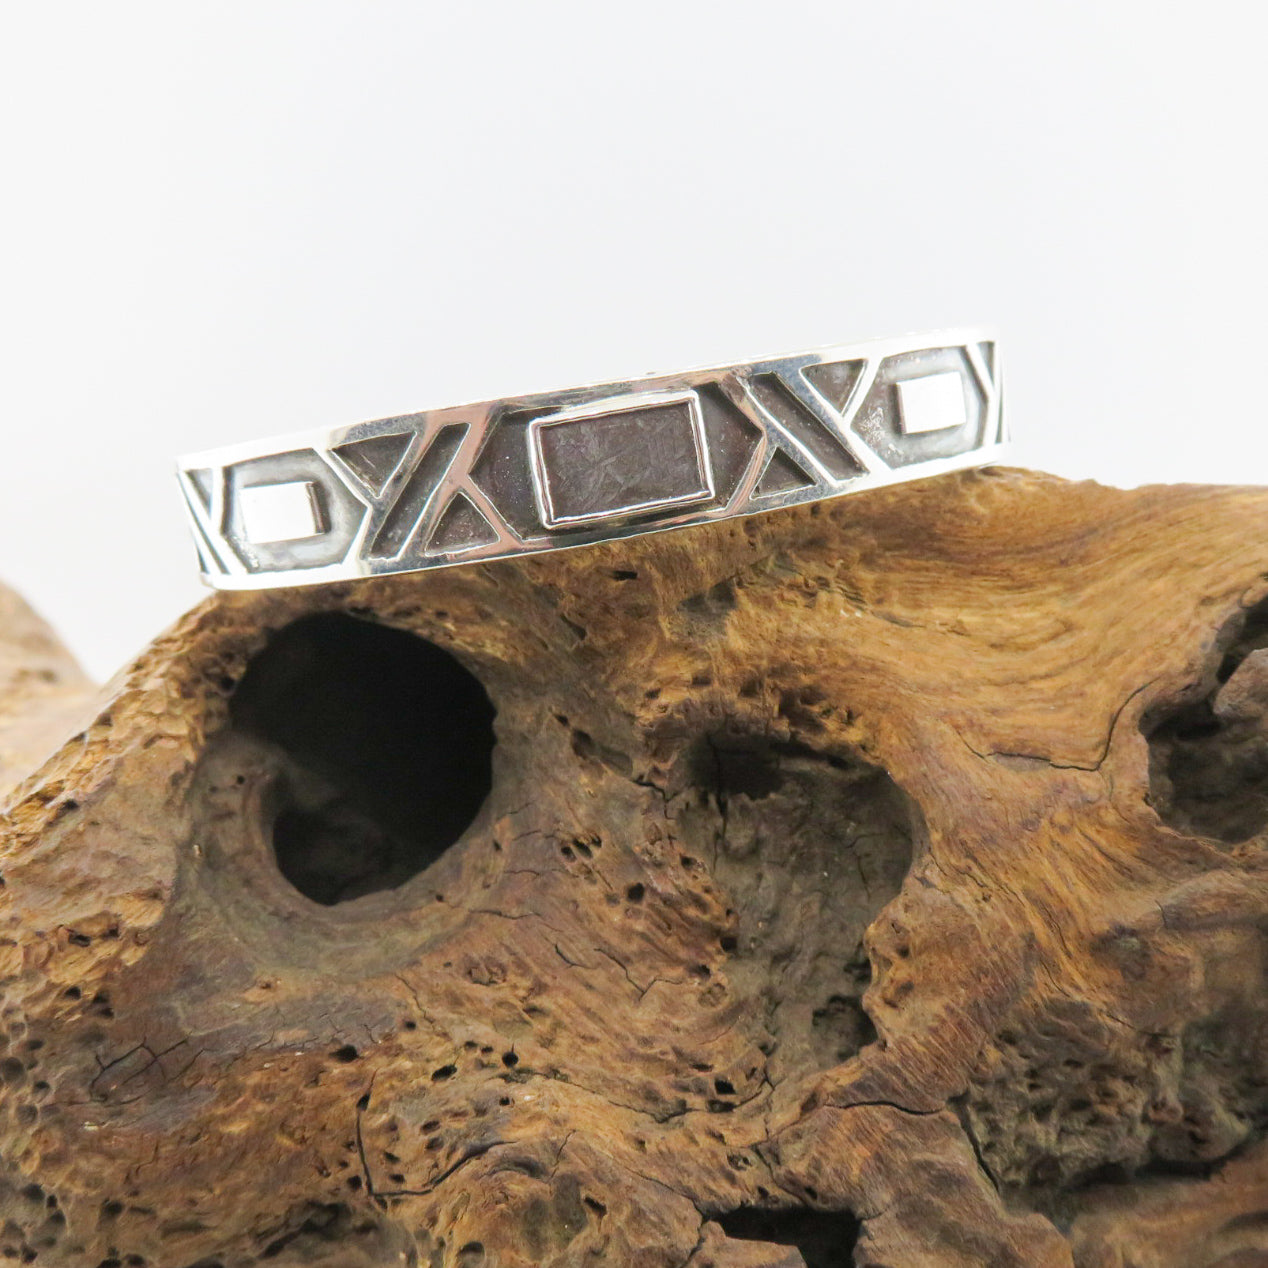 Sterling Silver Bangle with Iron Nickel Meteorite